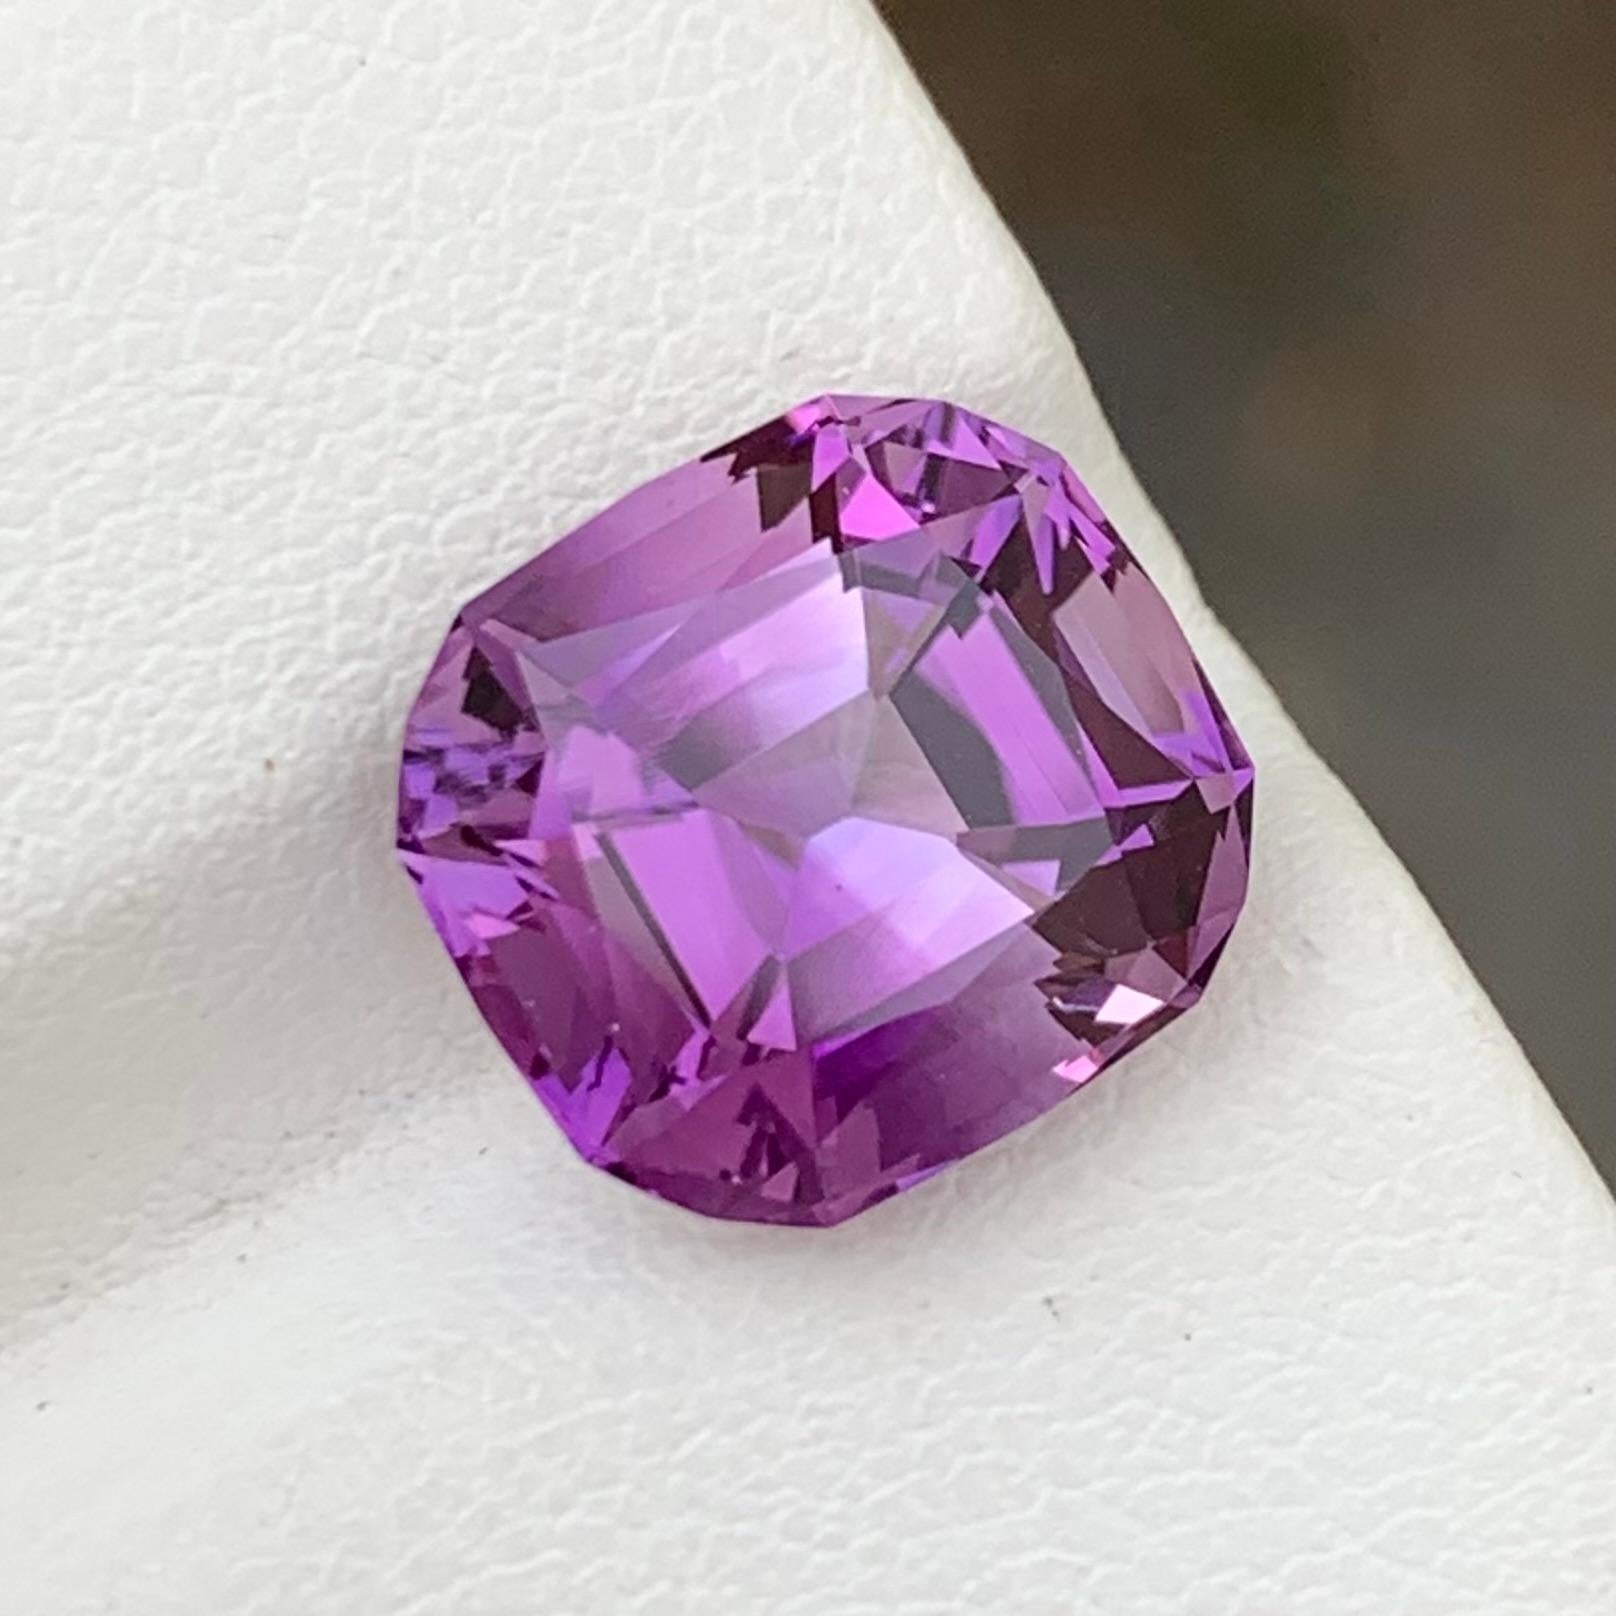 Loose Amethyst
Weight: 5.00 Carat
Dimension: 11.1 x 10.3 x 7.4 Mm
Colour: Purple
Origin: Brazil
Shape: Cushion
Certificate: On Demand
Treatment: Non


Amethyst, a captivating violet variety of quartz, has long held a place of prominence in the world